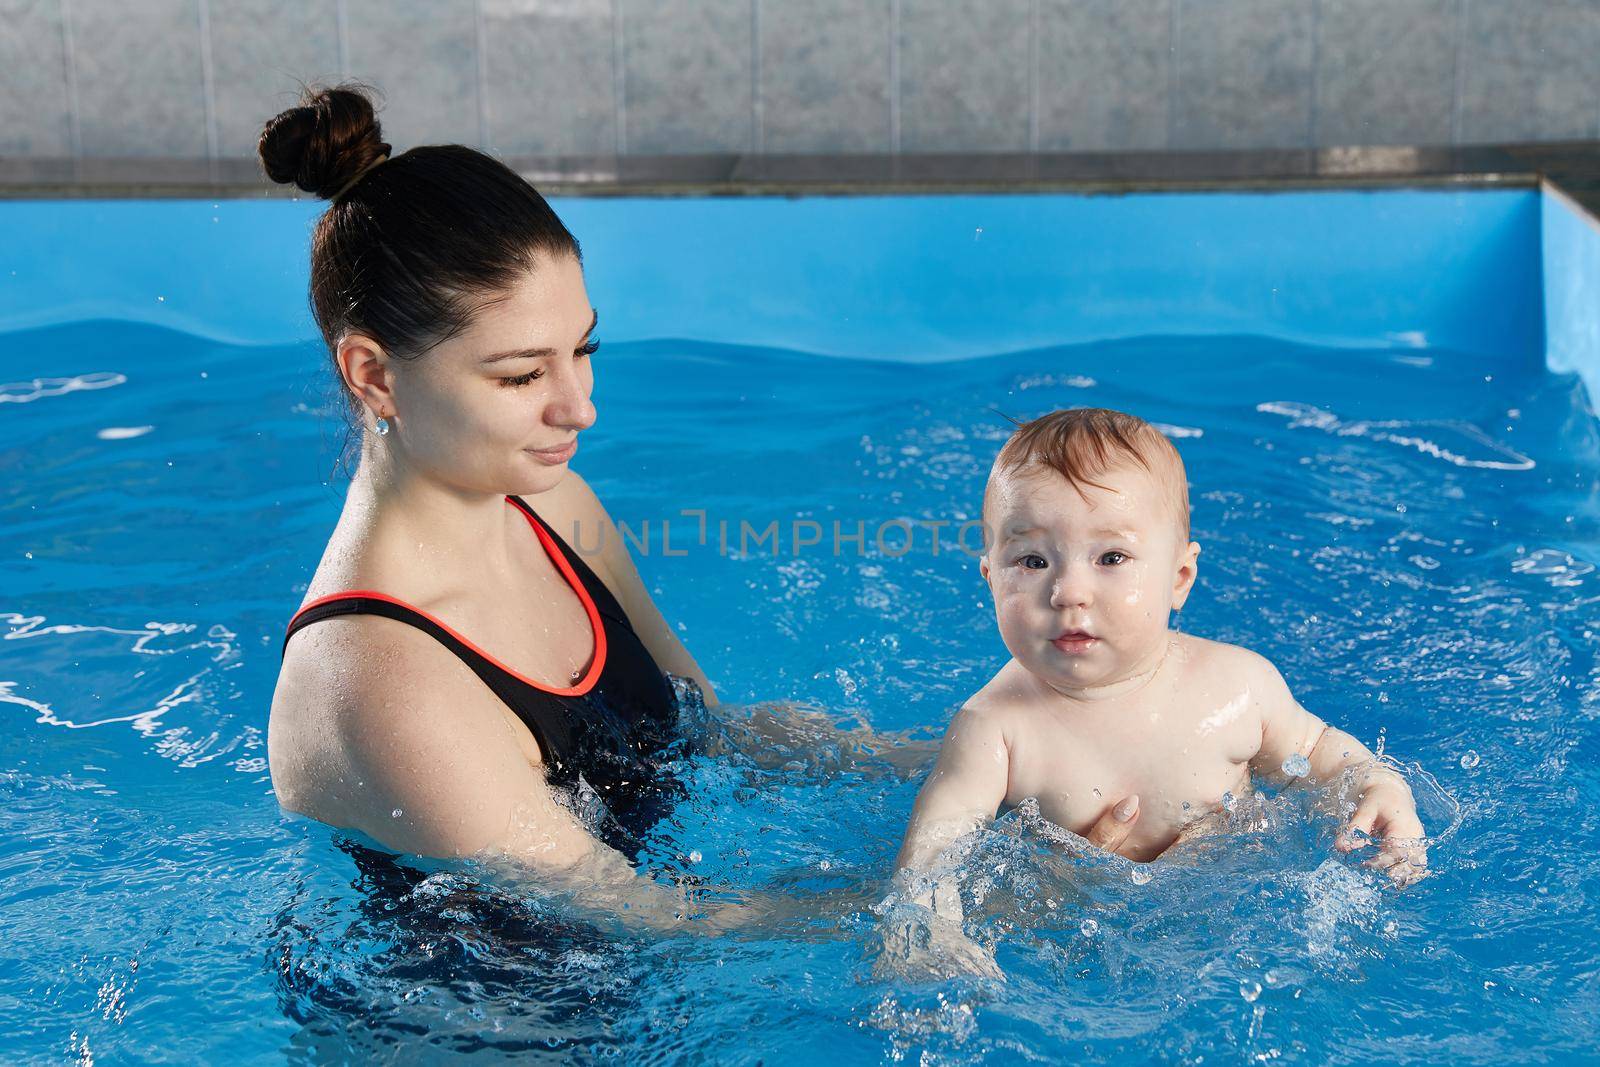 Little baby learning to swim in pool with teacher by Mariakray